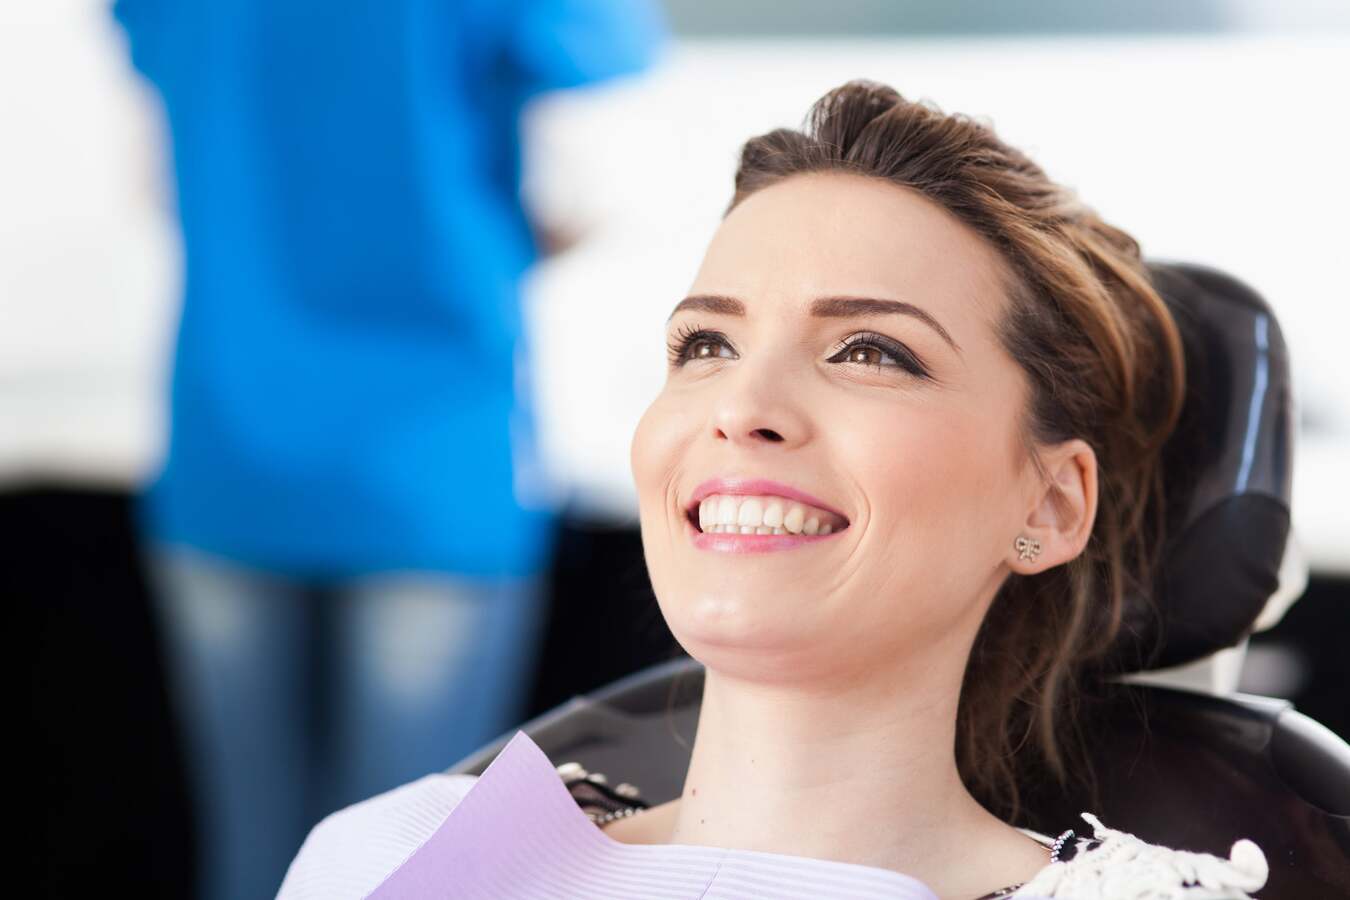 get the radiant smile you’ve always wanted with professional teeth whitening